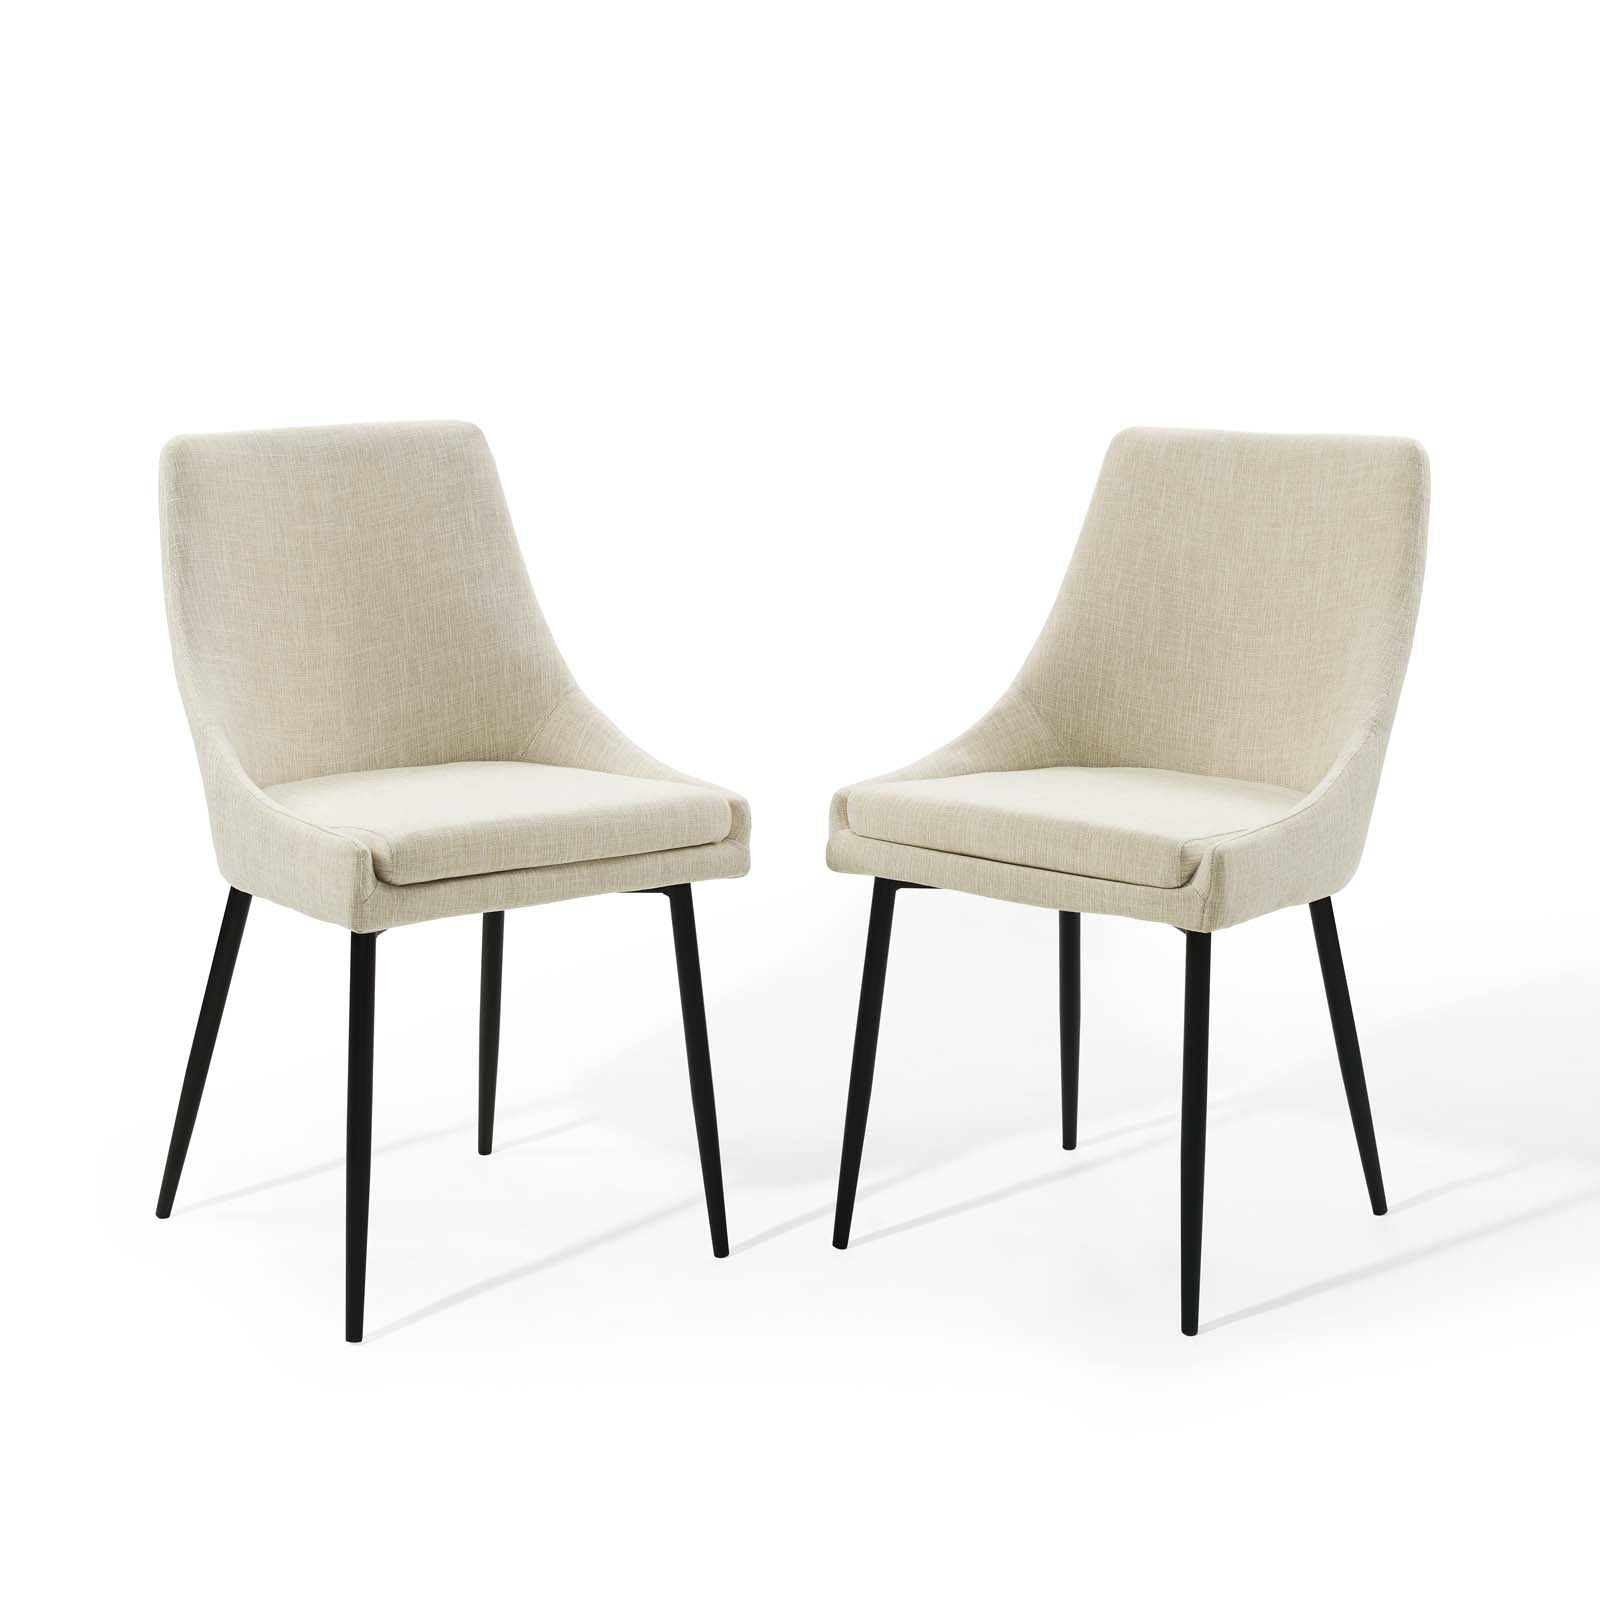 Viscount Upholstered Fabric Dining Chairs - ( Set of 2 ) Black Beige